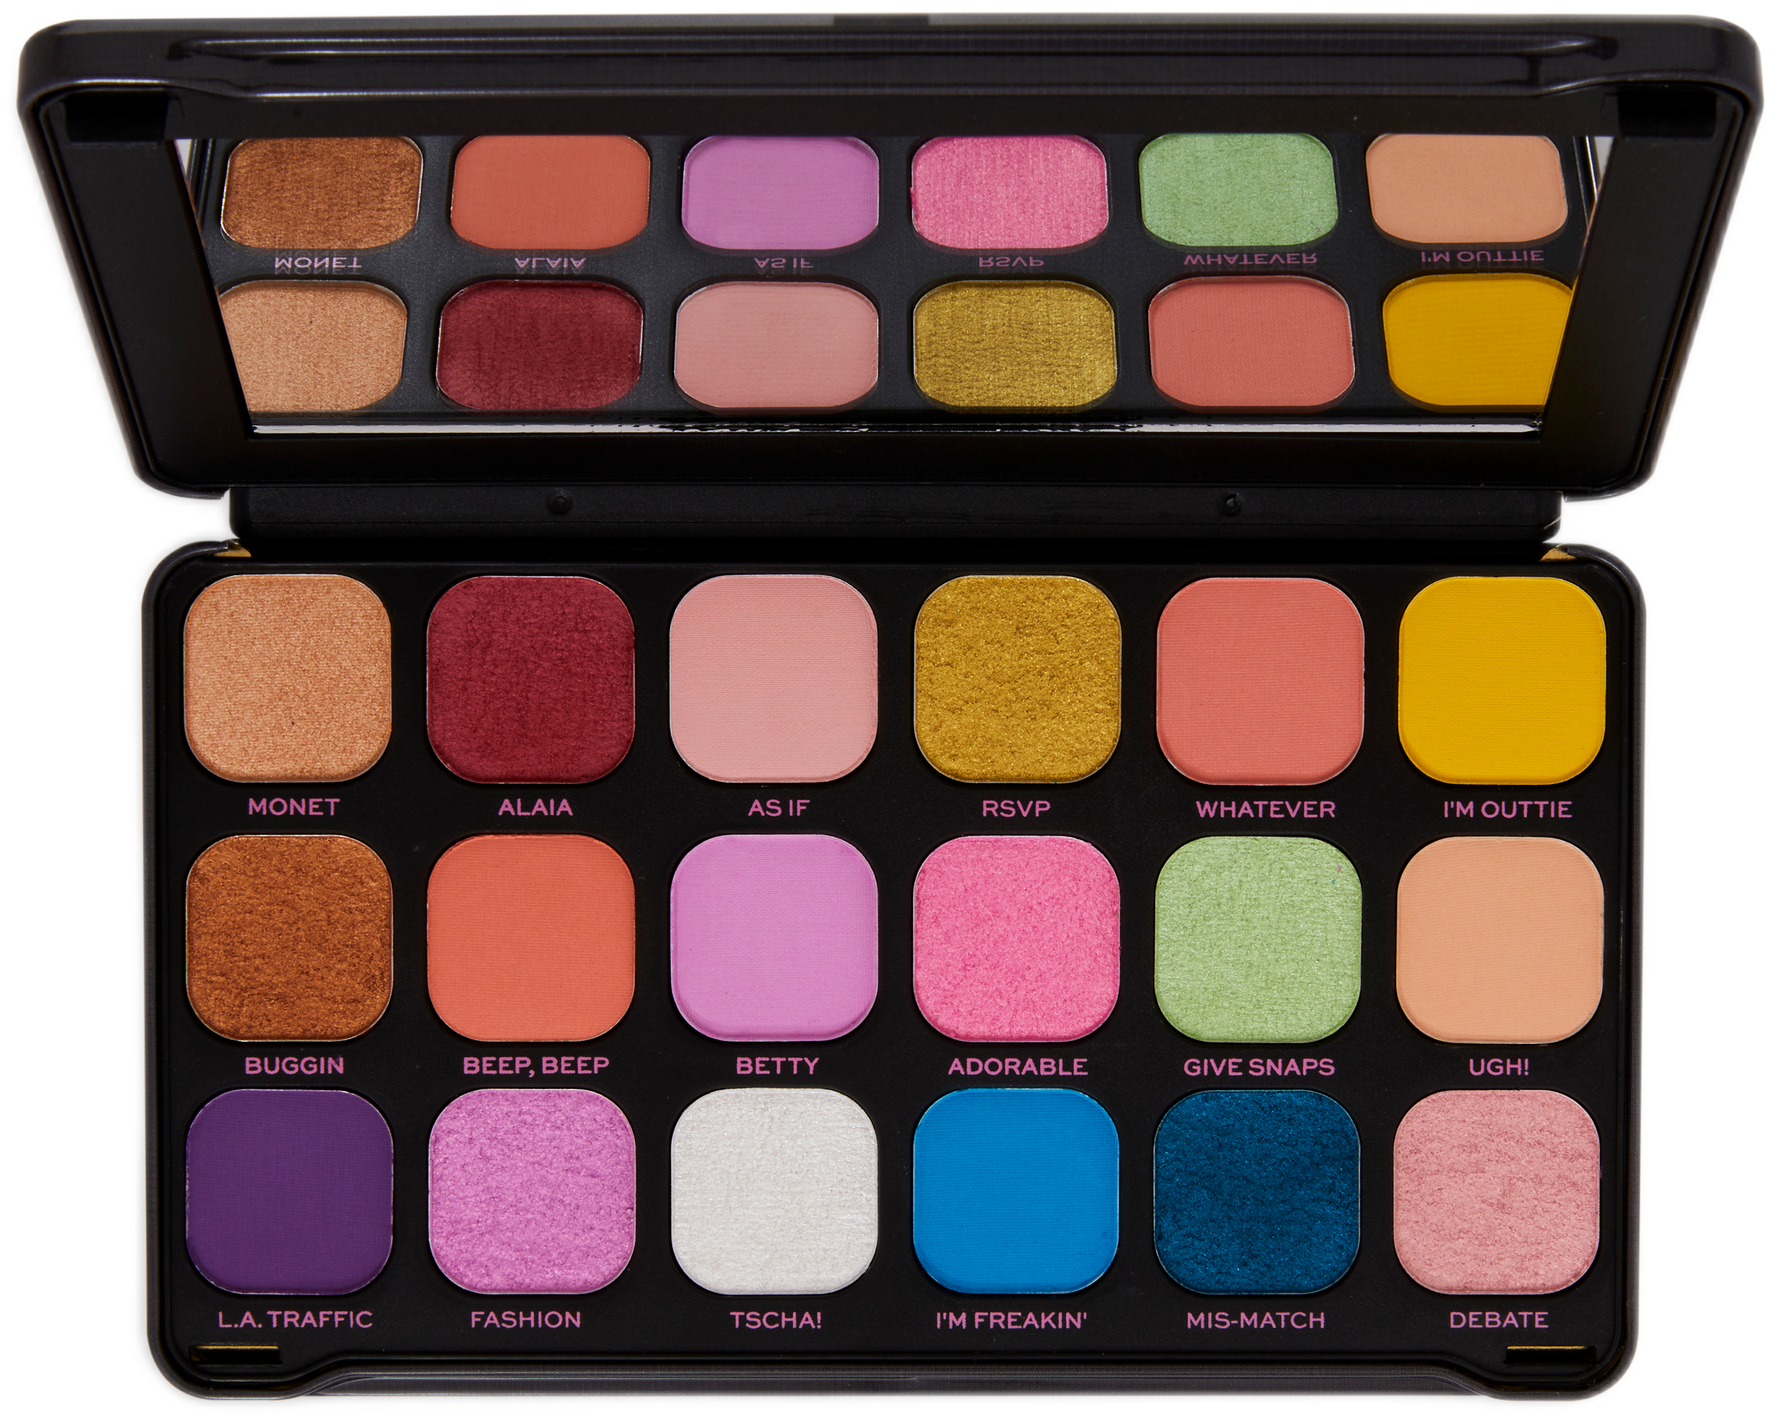 MAKEUP REVOLUTION X Clueless VCR As If Forever Flawless Eyeshadow Palette